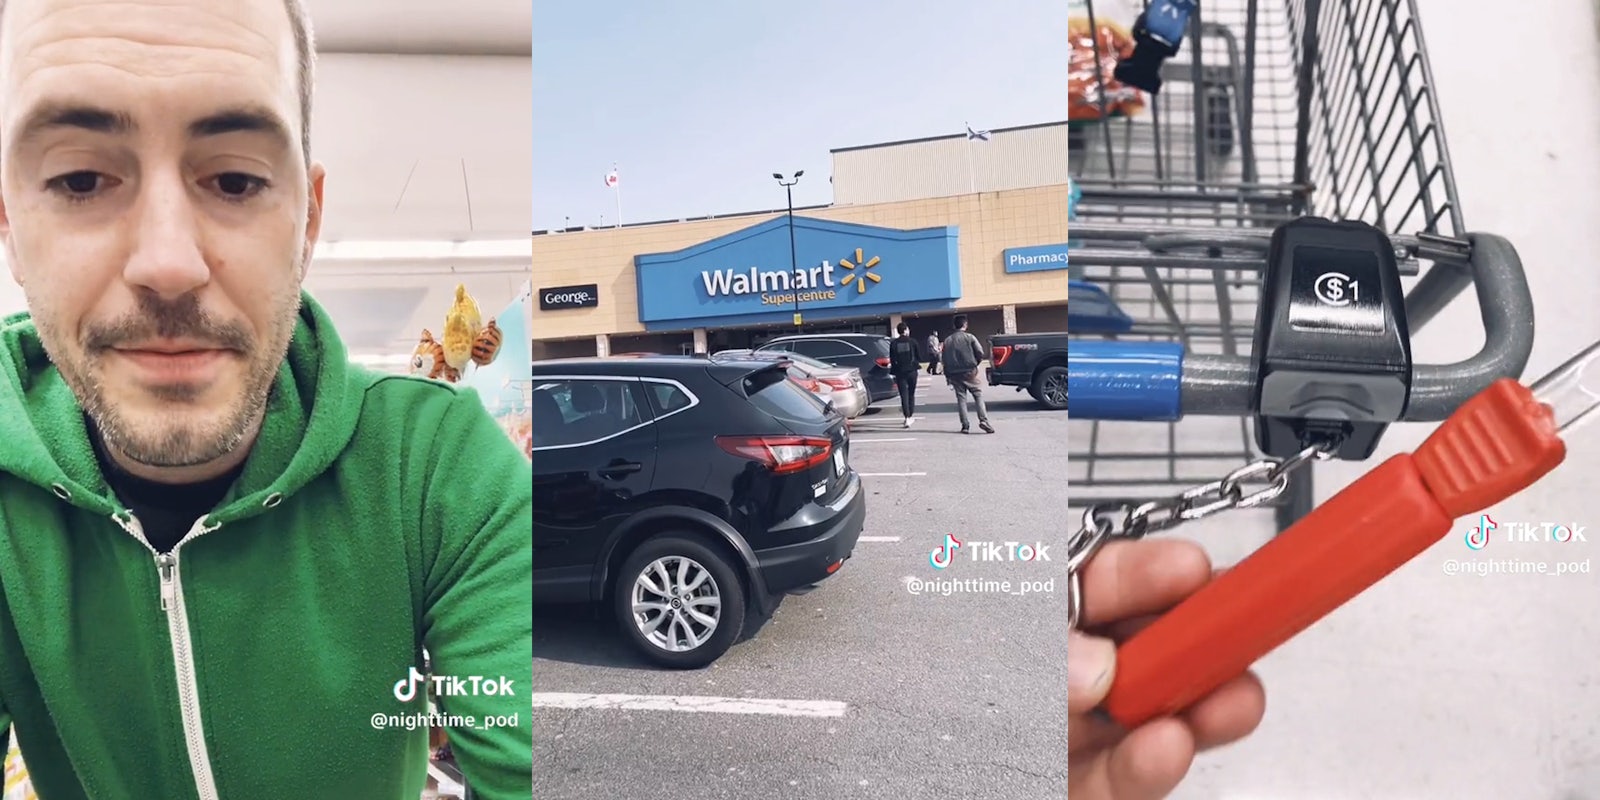 man confused and upset by cart deposit device at Walmart